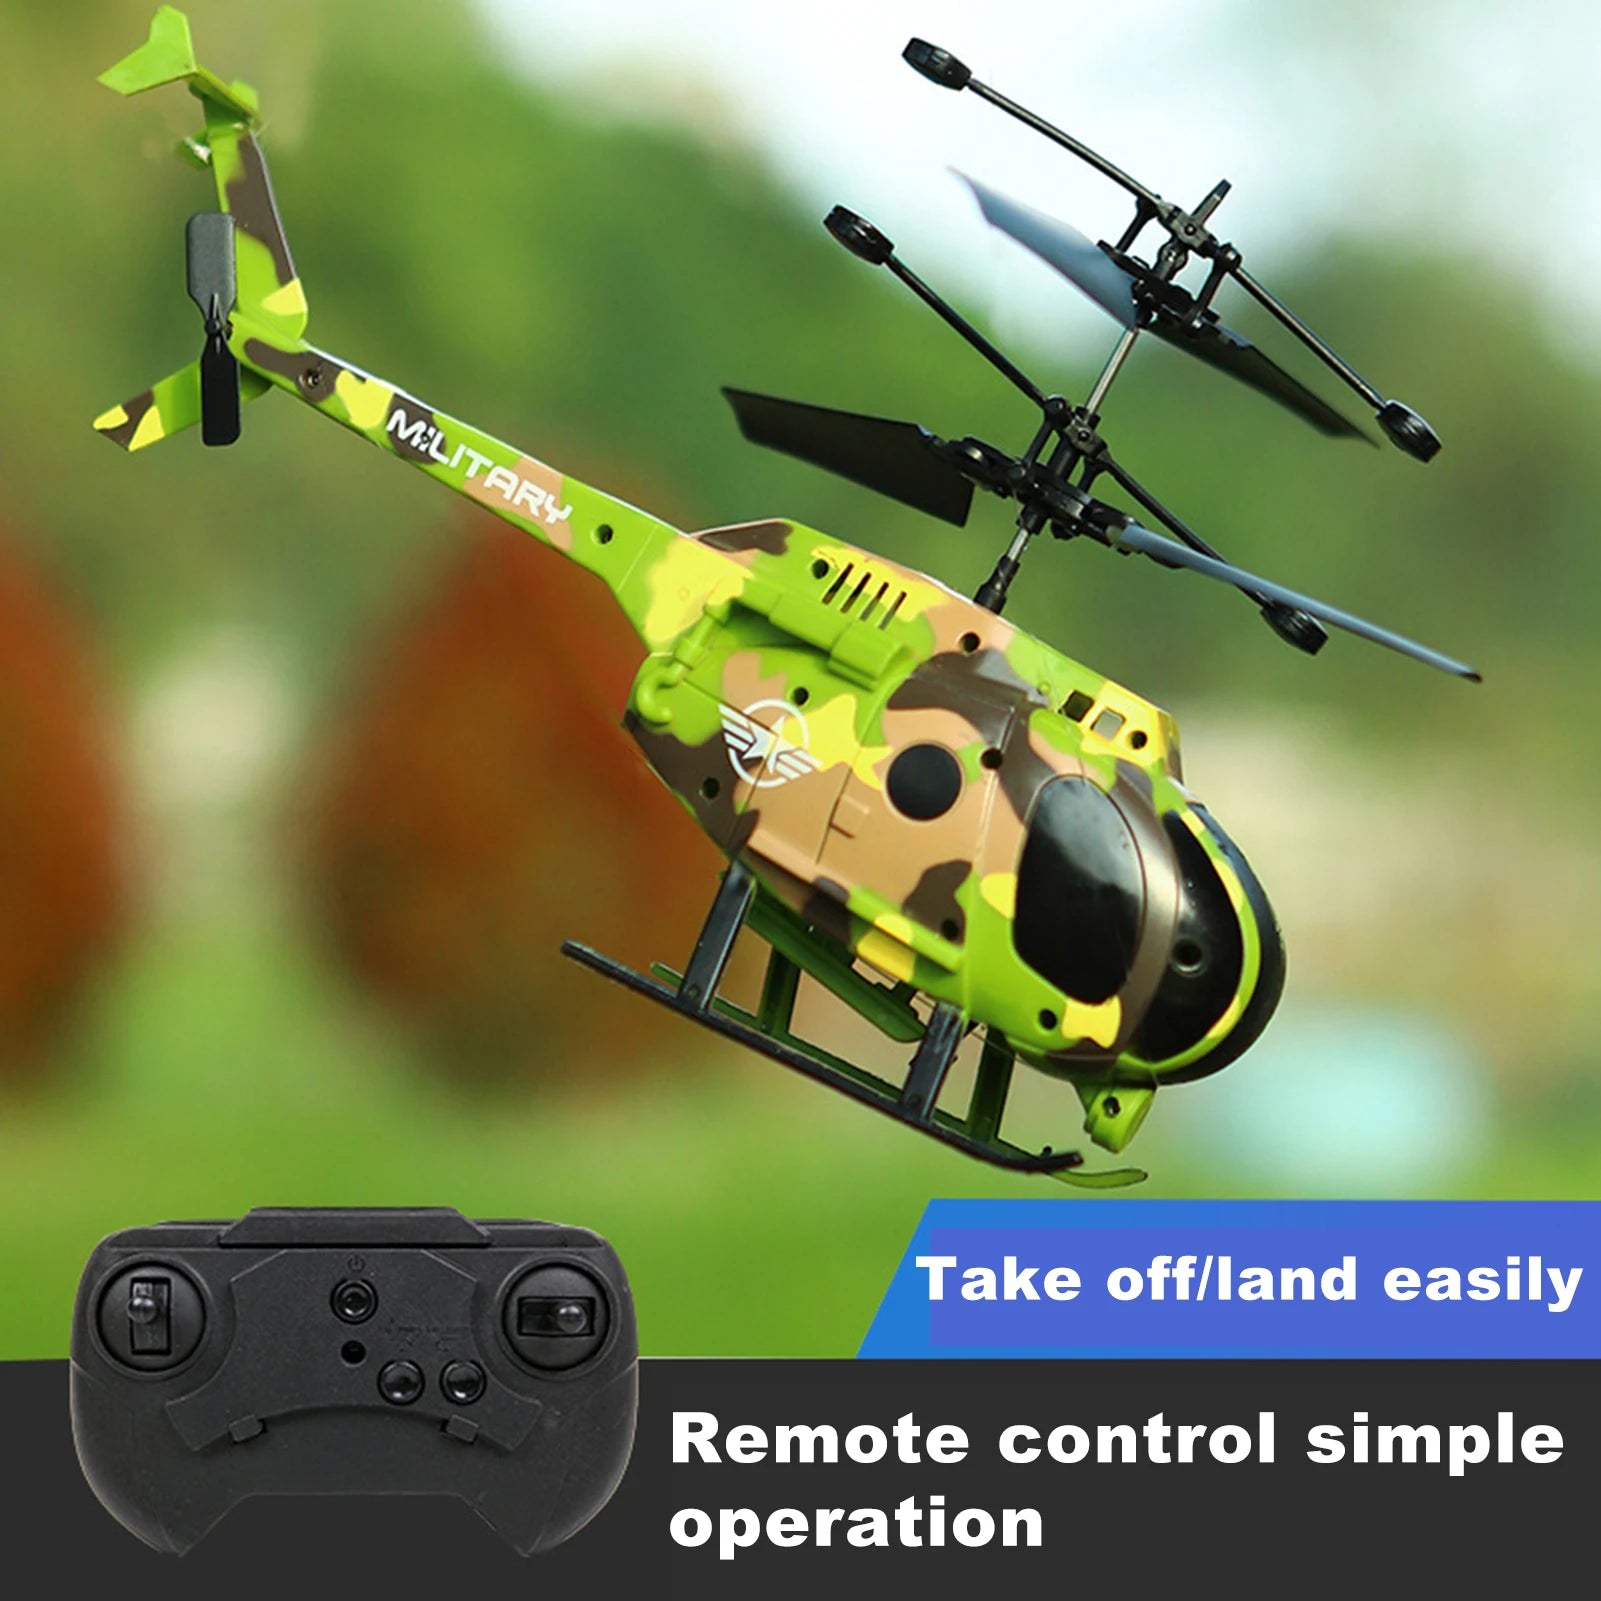 C135 RC Helicopter, Take offlland easily Remote control simple operation MIITARY '